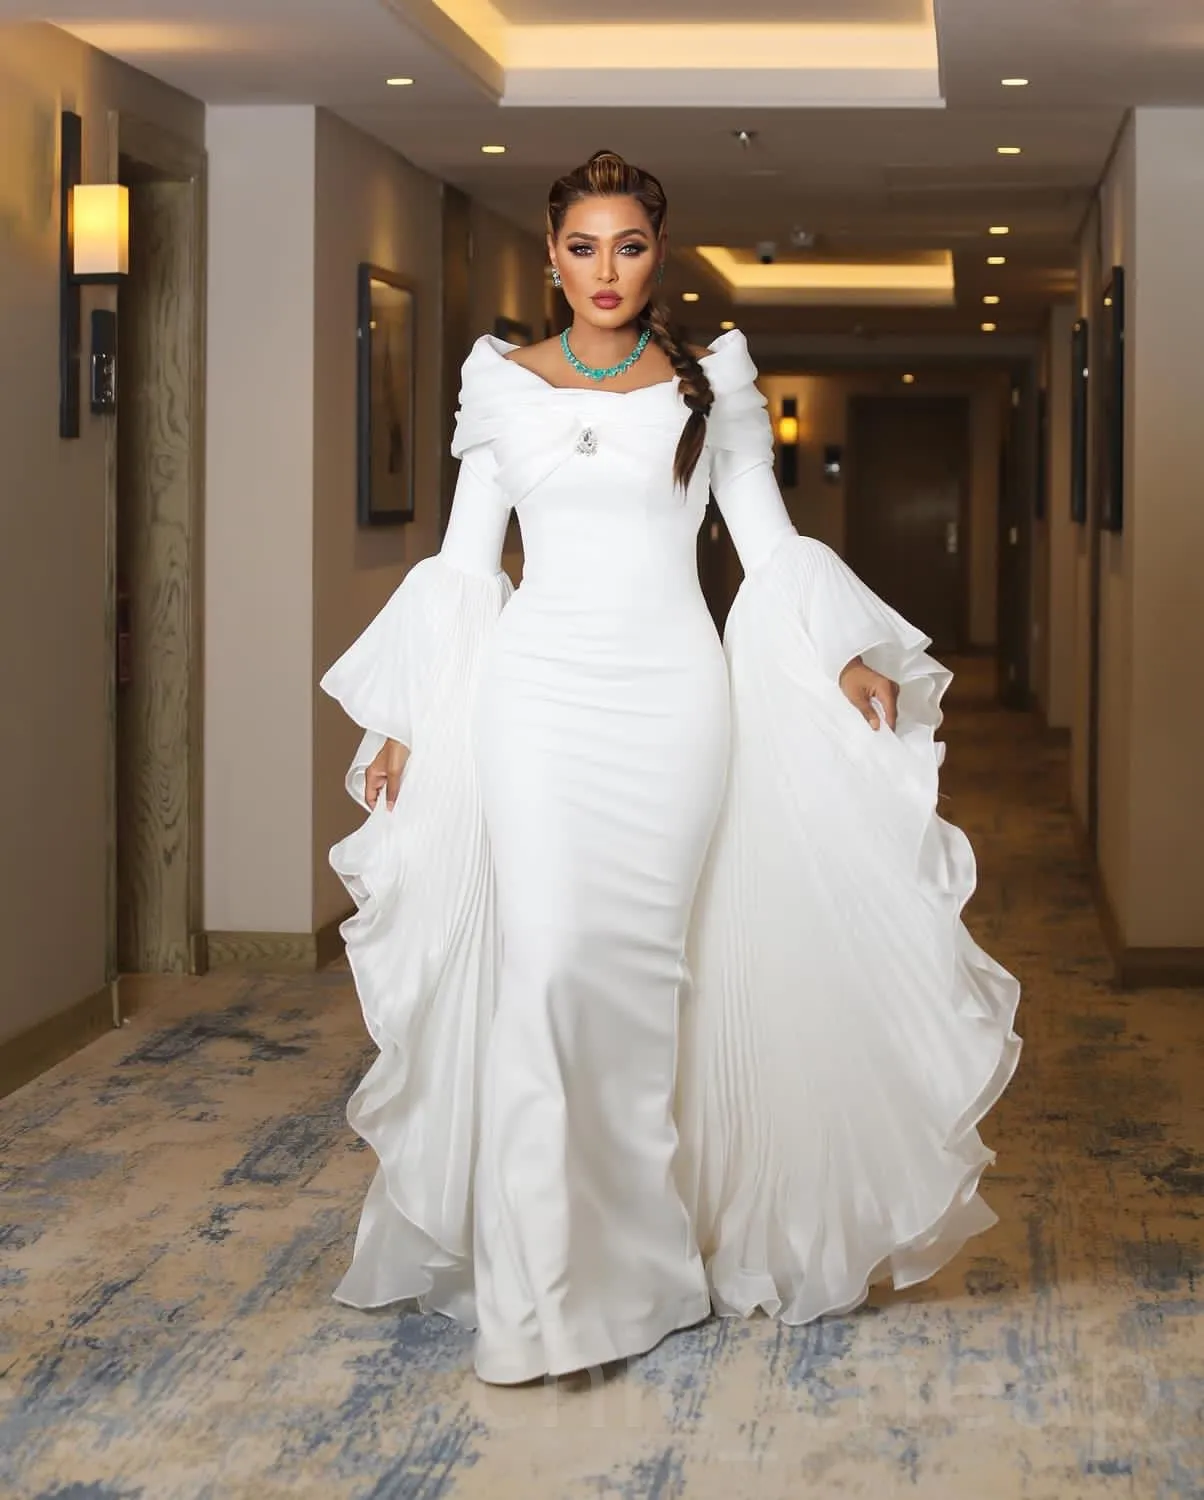 2023 August Aso Ebi White Mermaid Prom Dress Satin Crystals Evening Formal Party Second Reception Birthday Engagement Gowns Dresses Robe De Soiree ZJ789